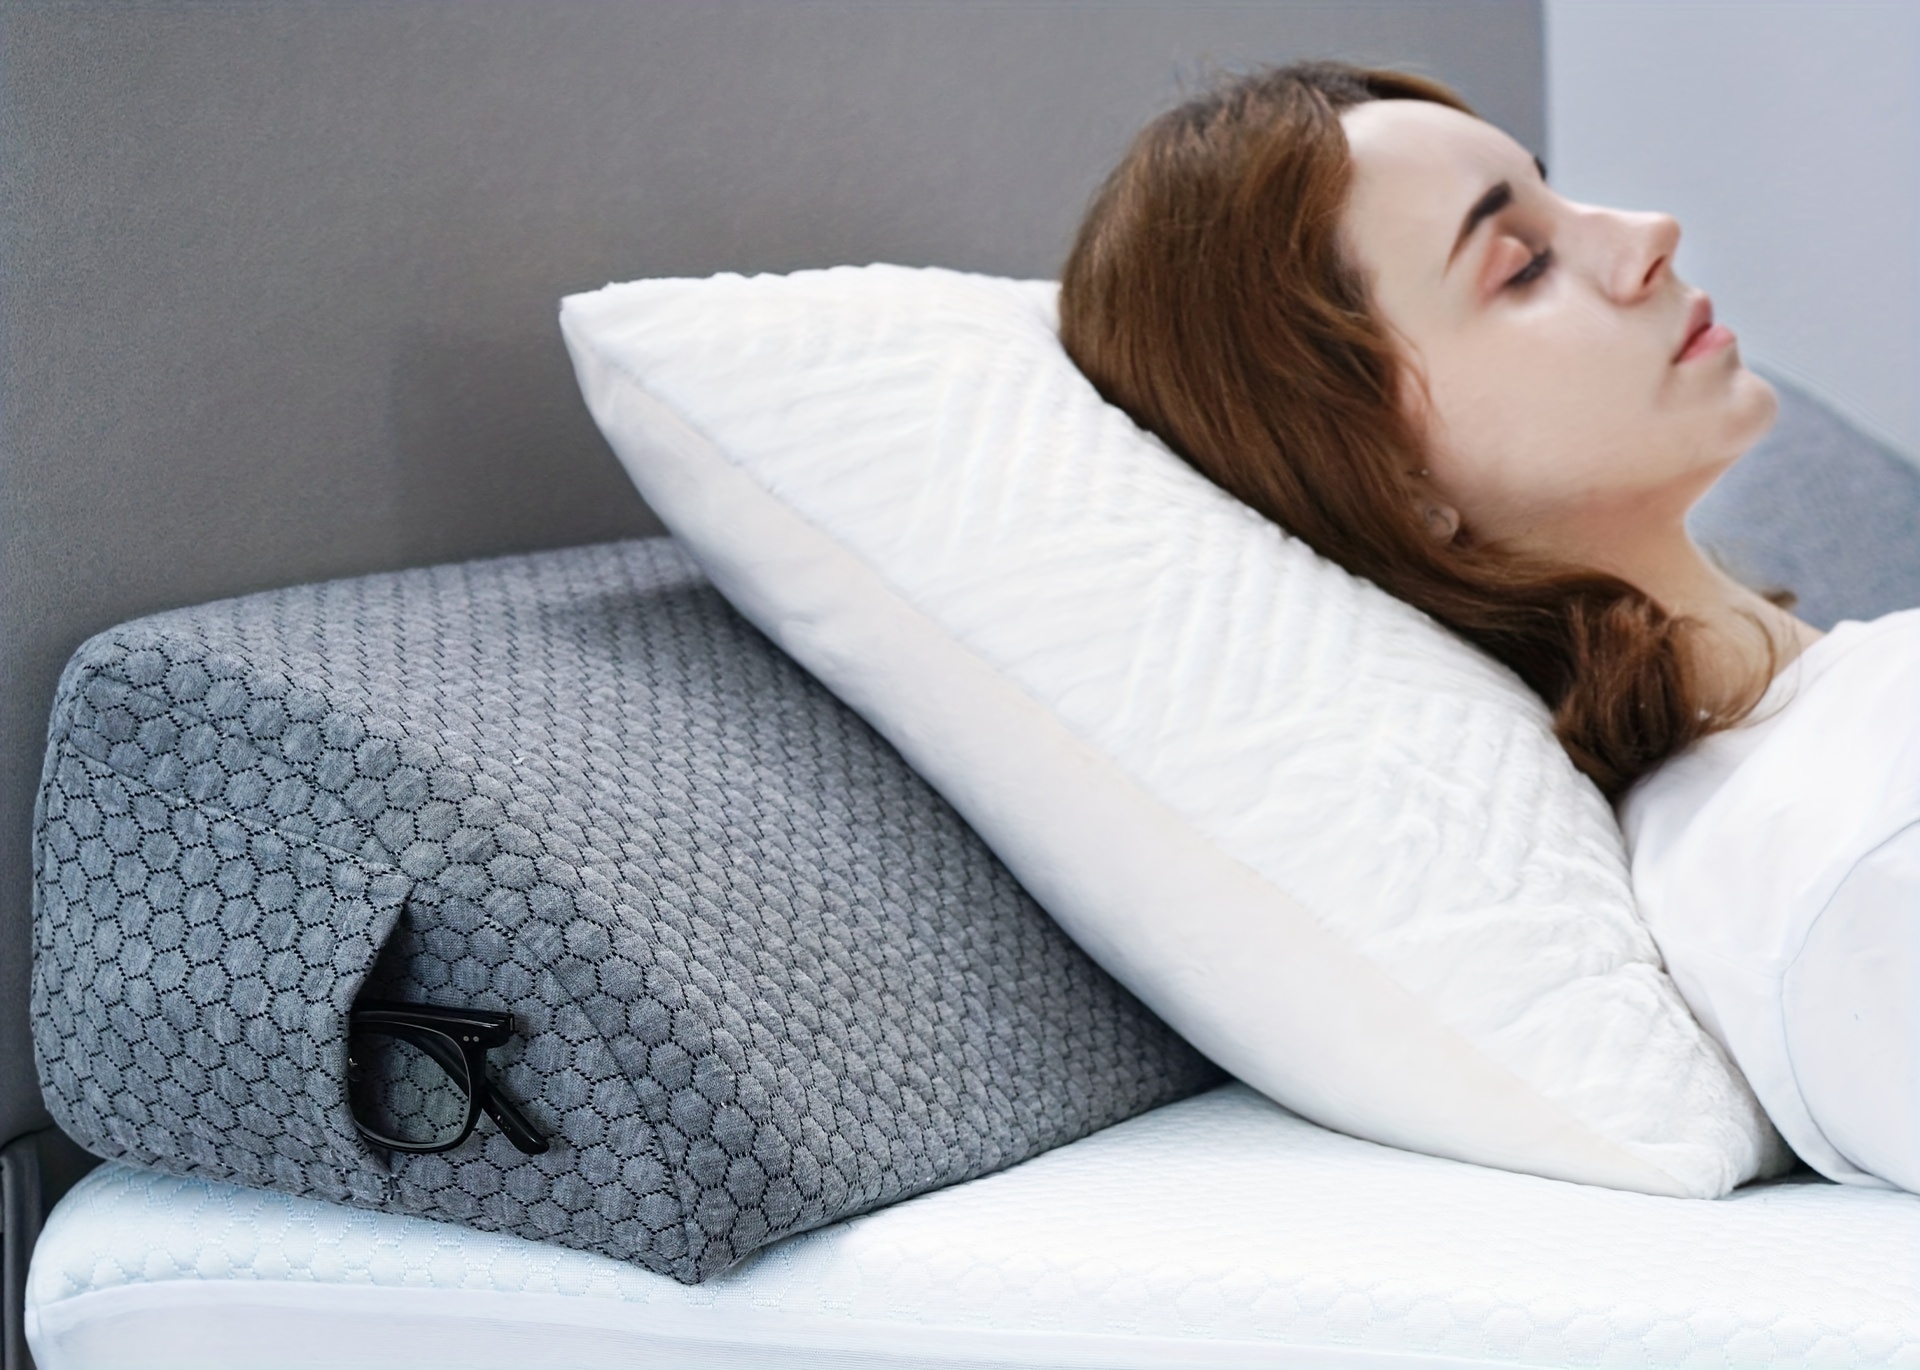 LUXELIFT Adjustable Support Therapy Bed Wedge Pillow 12ʺ